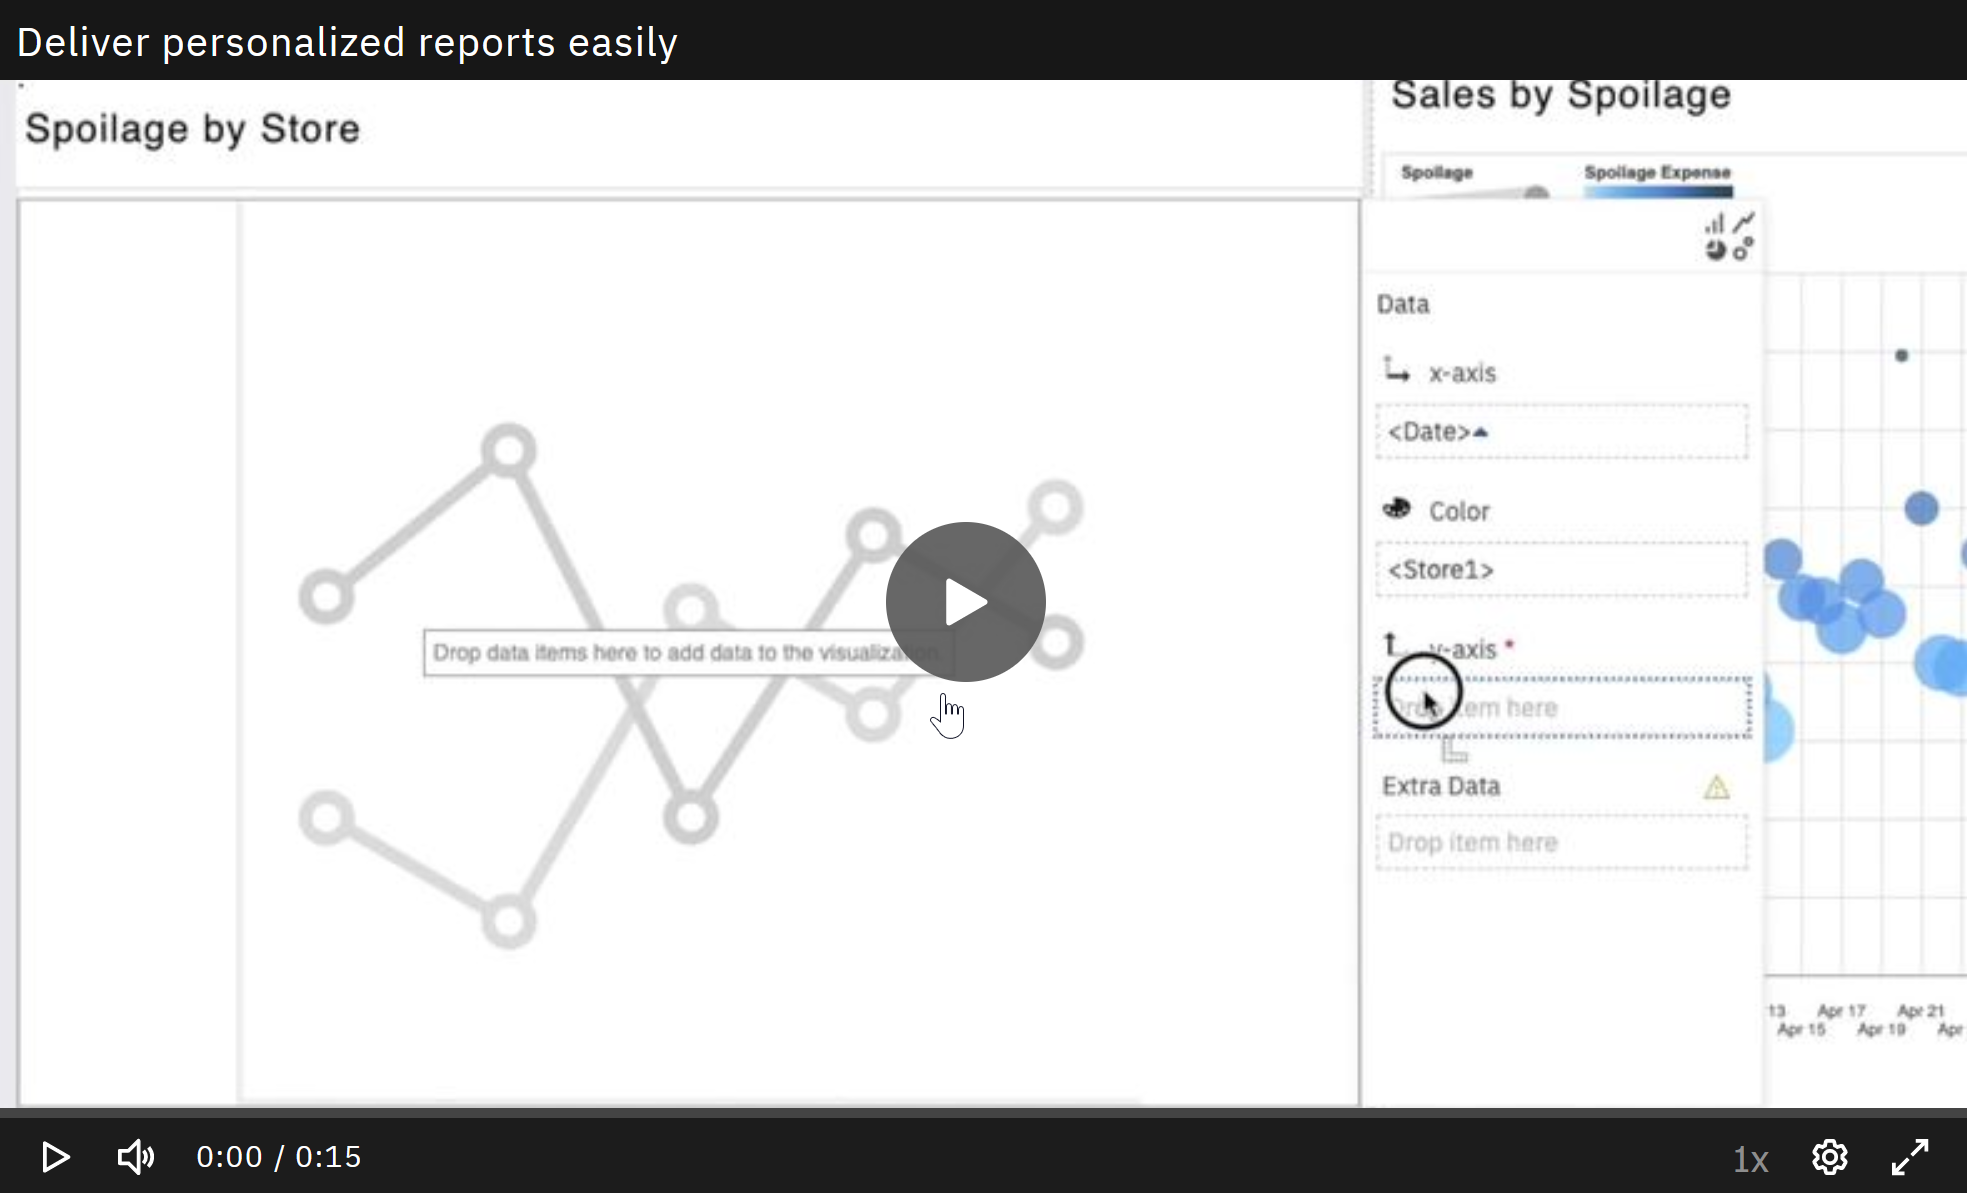 areto IBM Cognos Analytics with Watson deliver personalized reports